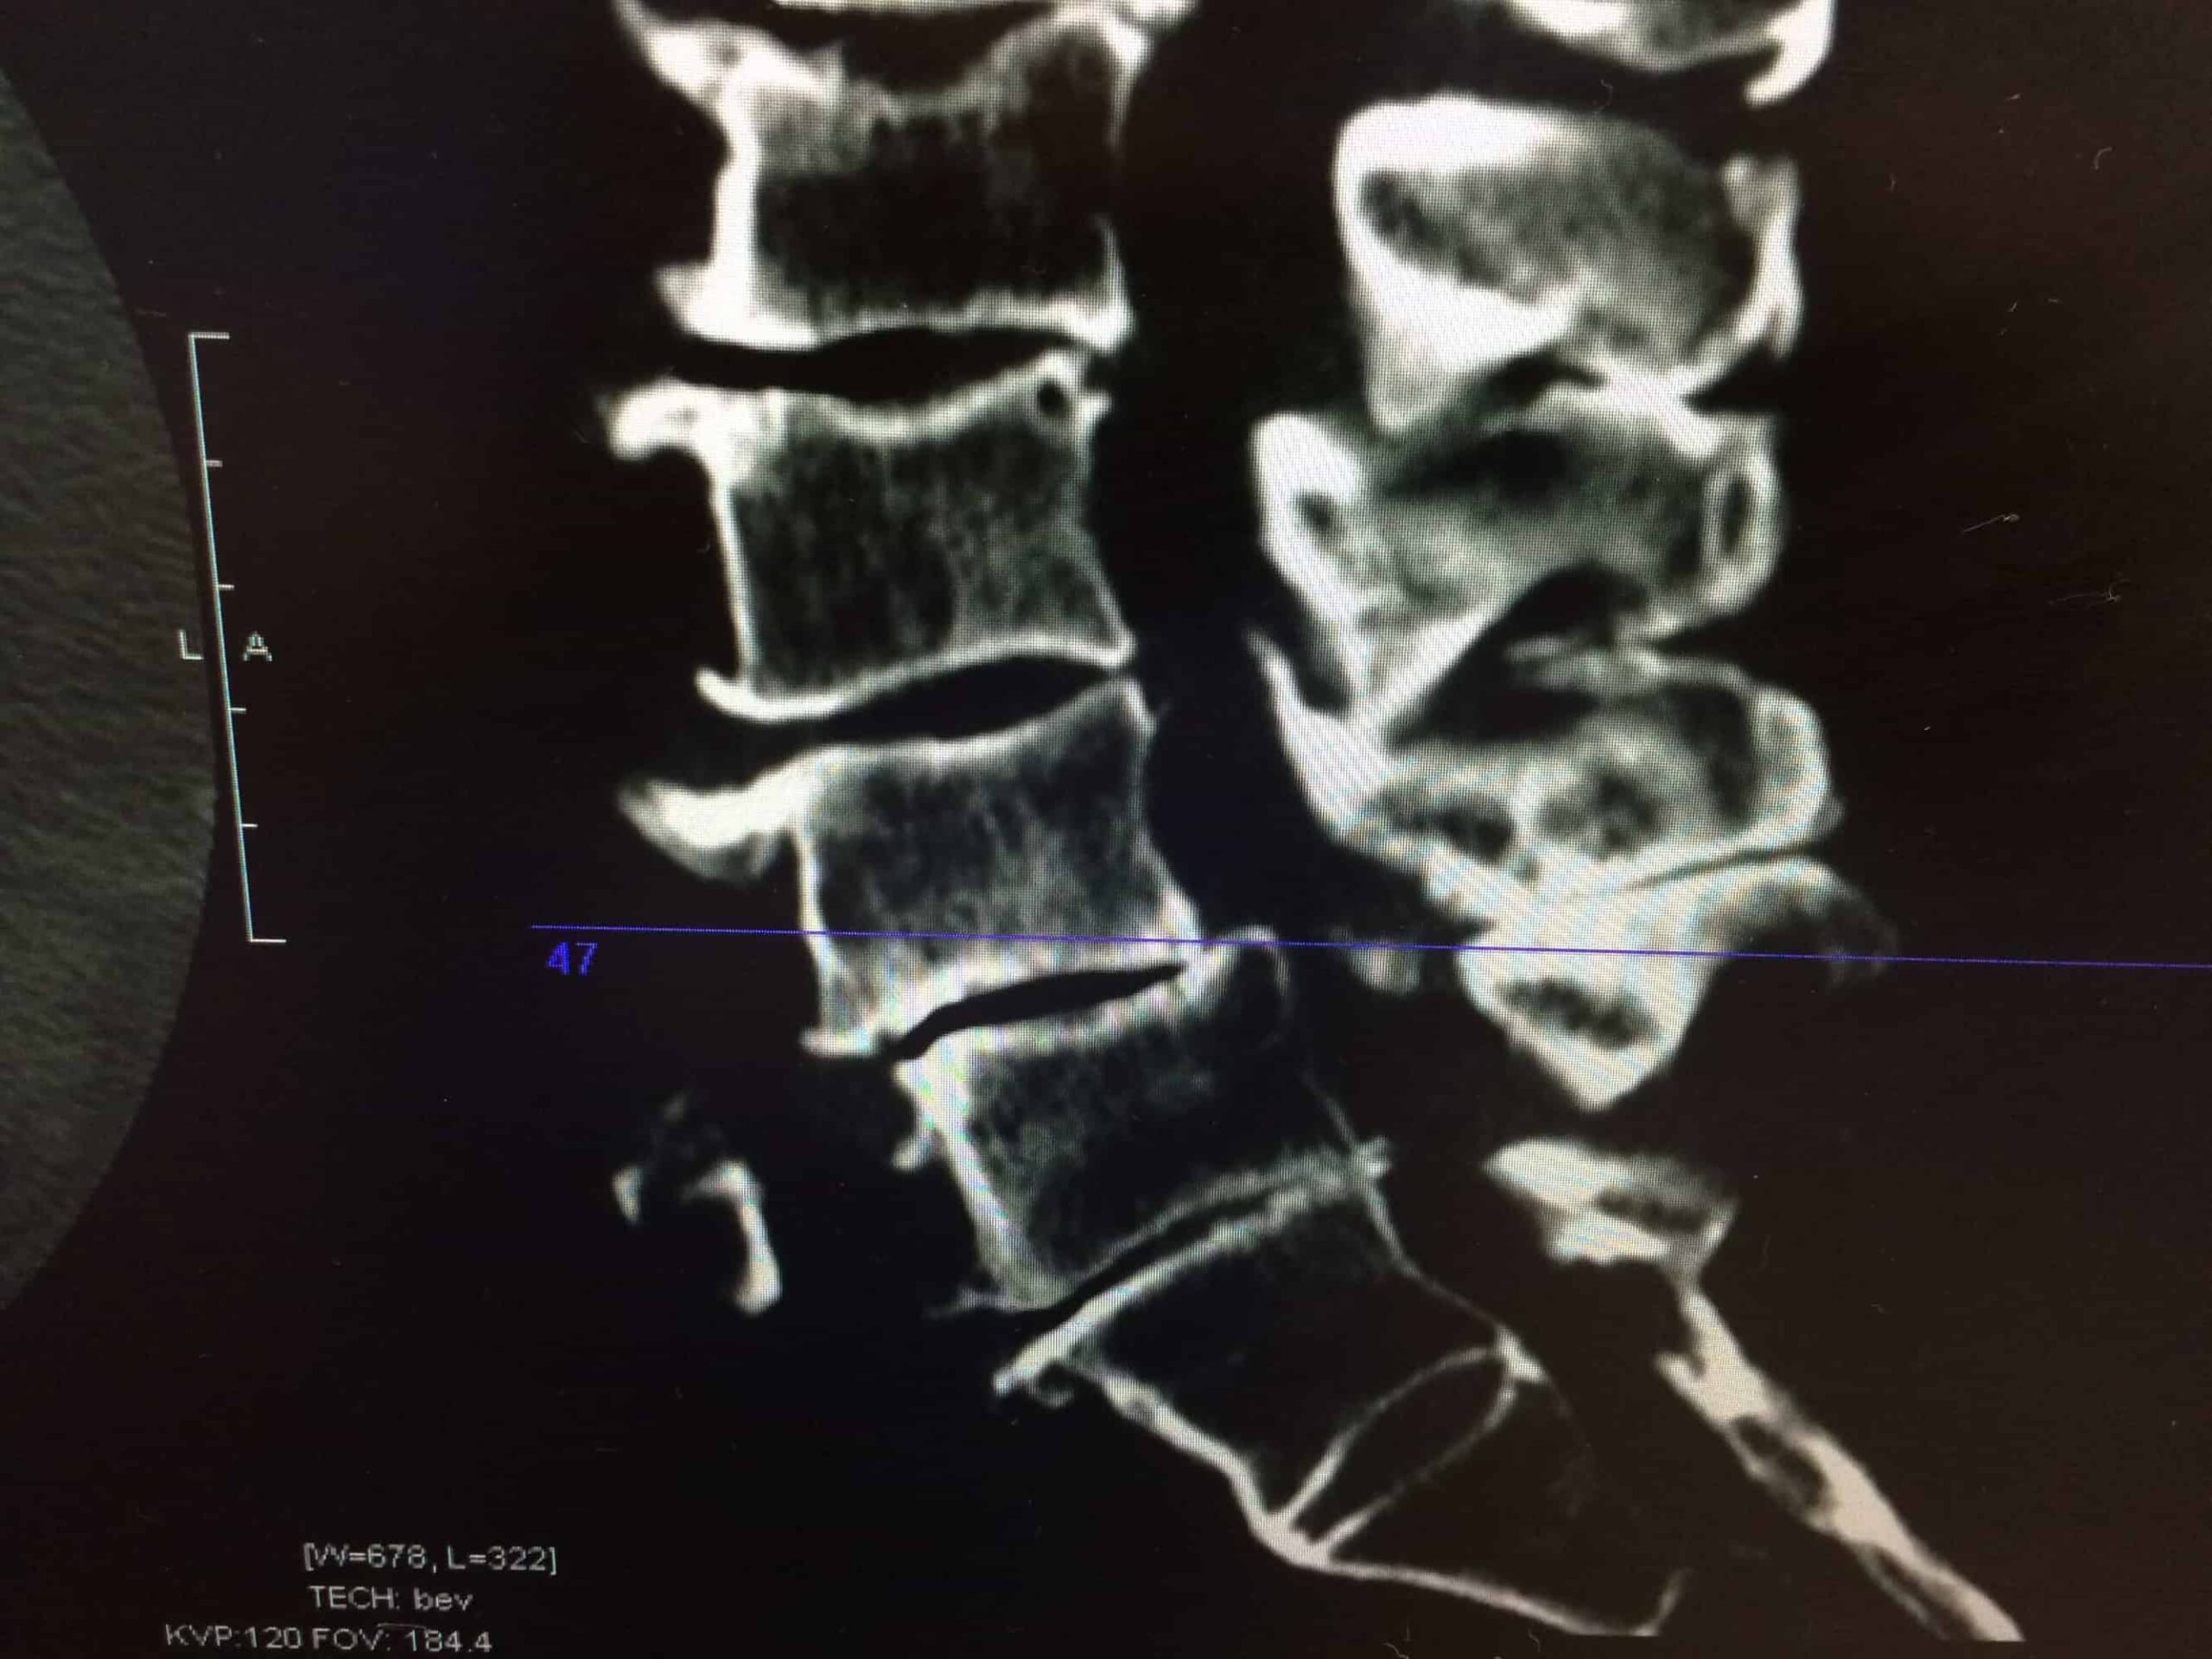 A section of an x-ray image that shows the lower vertebrae of a person's spine.